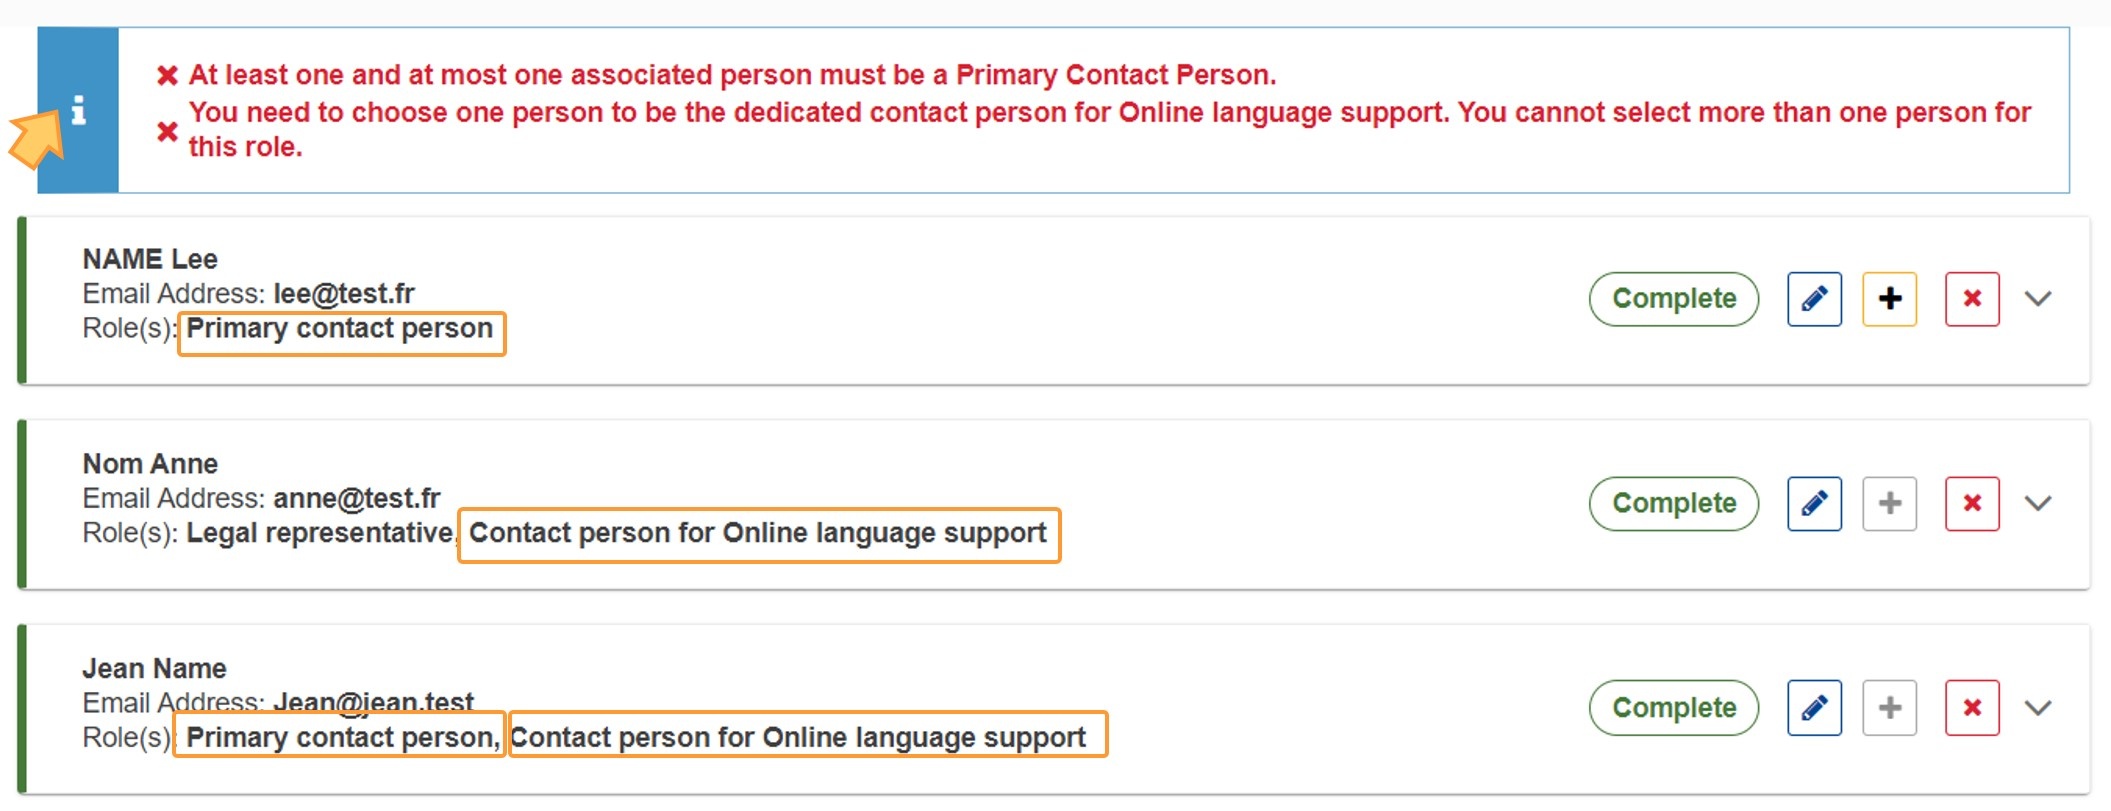 Error message in case of too many Primary contacts or contacts for Online language support